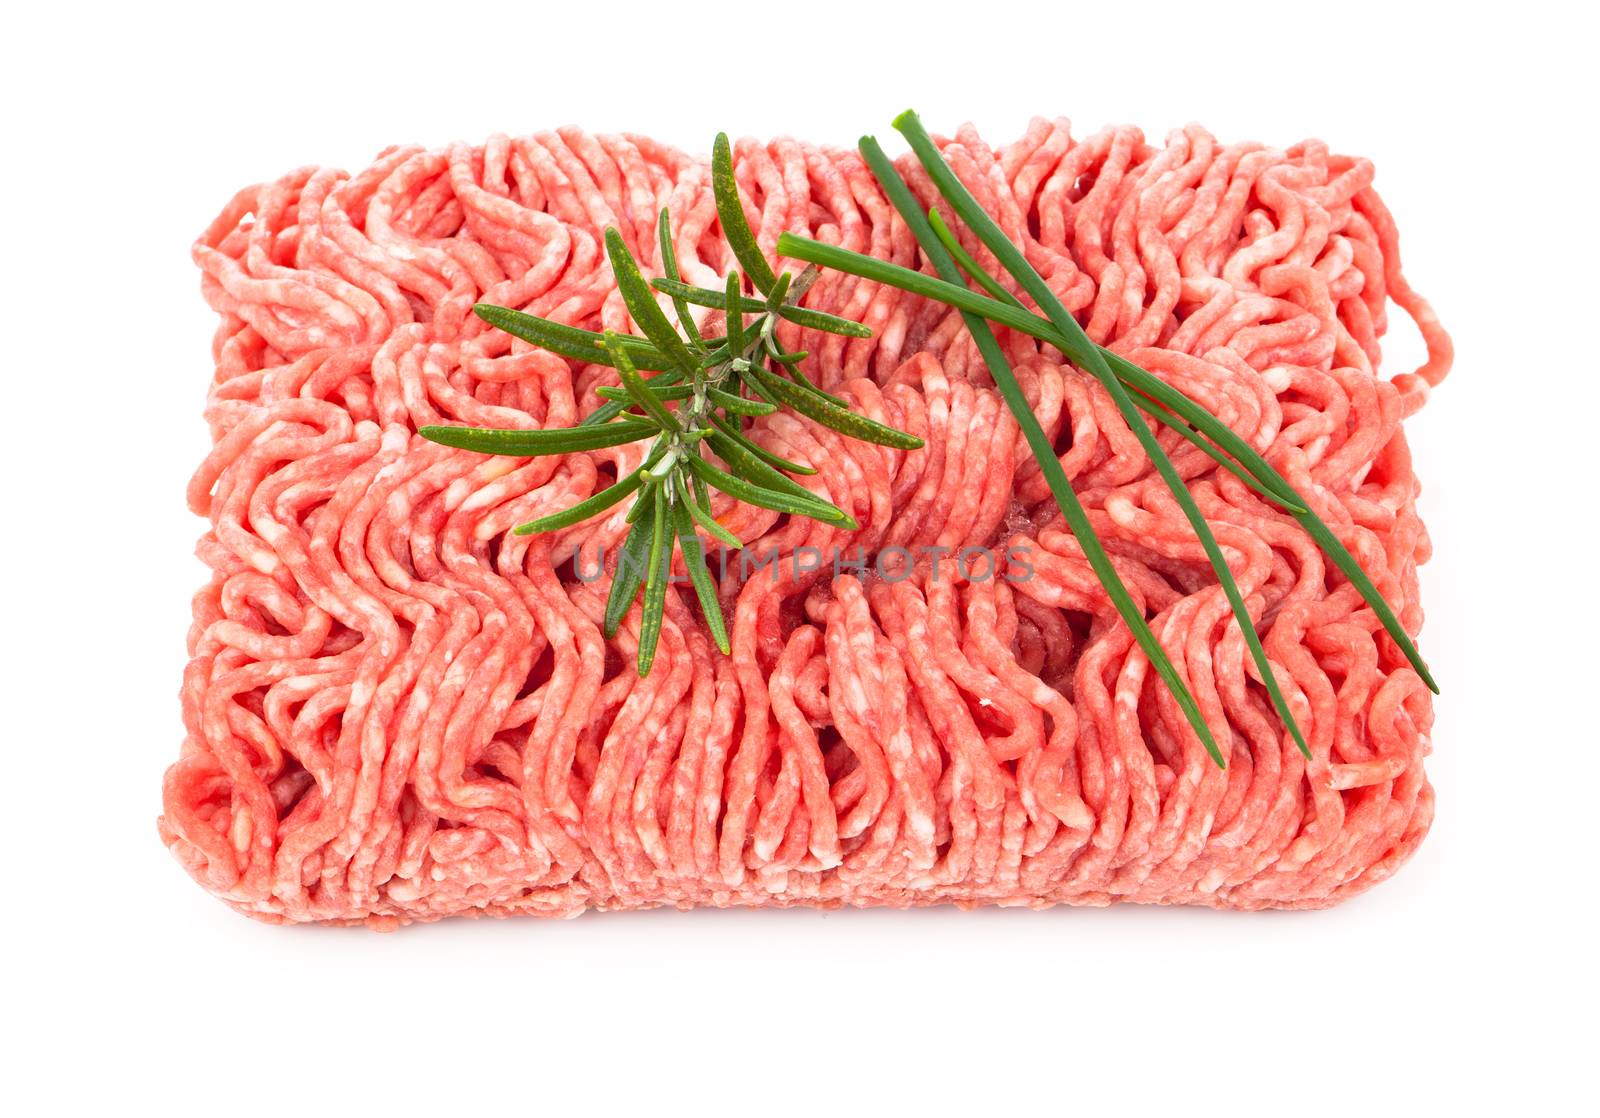 raw minced meat, isolated on white background